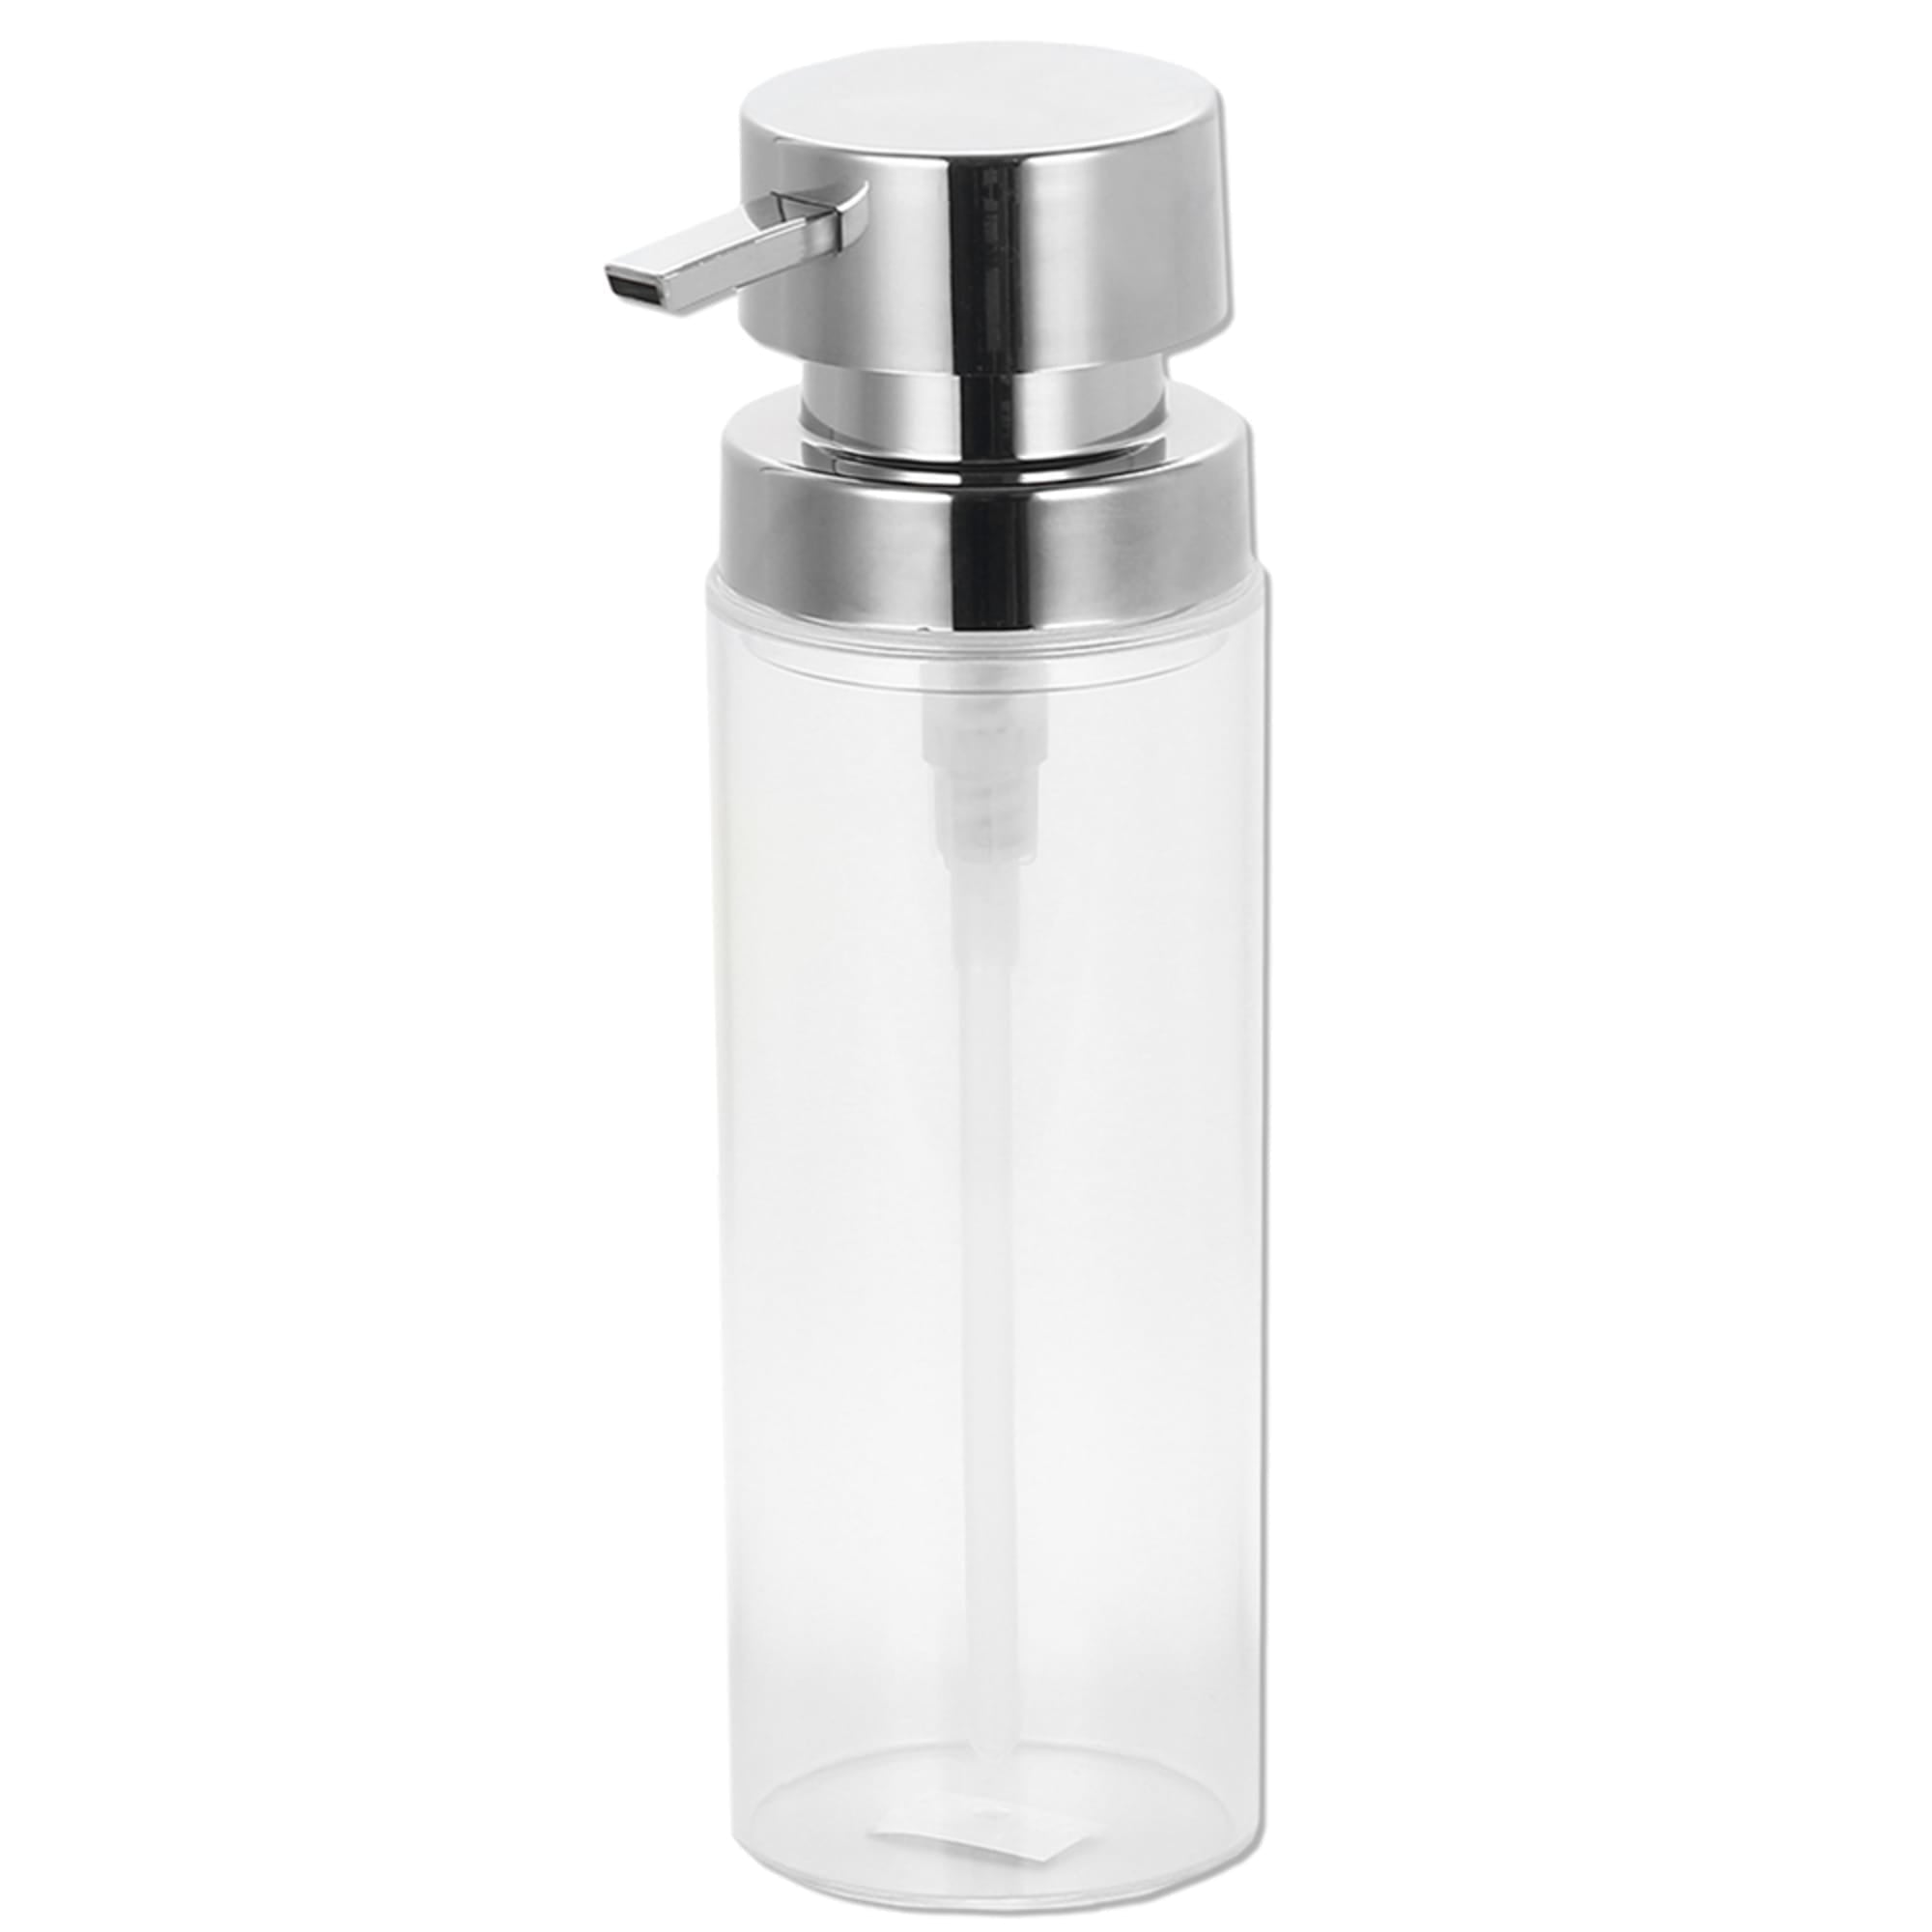 Home Basics 12 oz.  Cylinder Plastic Hand Soap Dispenser with Brushed Stainless Steel Pump, Clear $5.00 EACH, CASE PACK OF 24